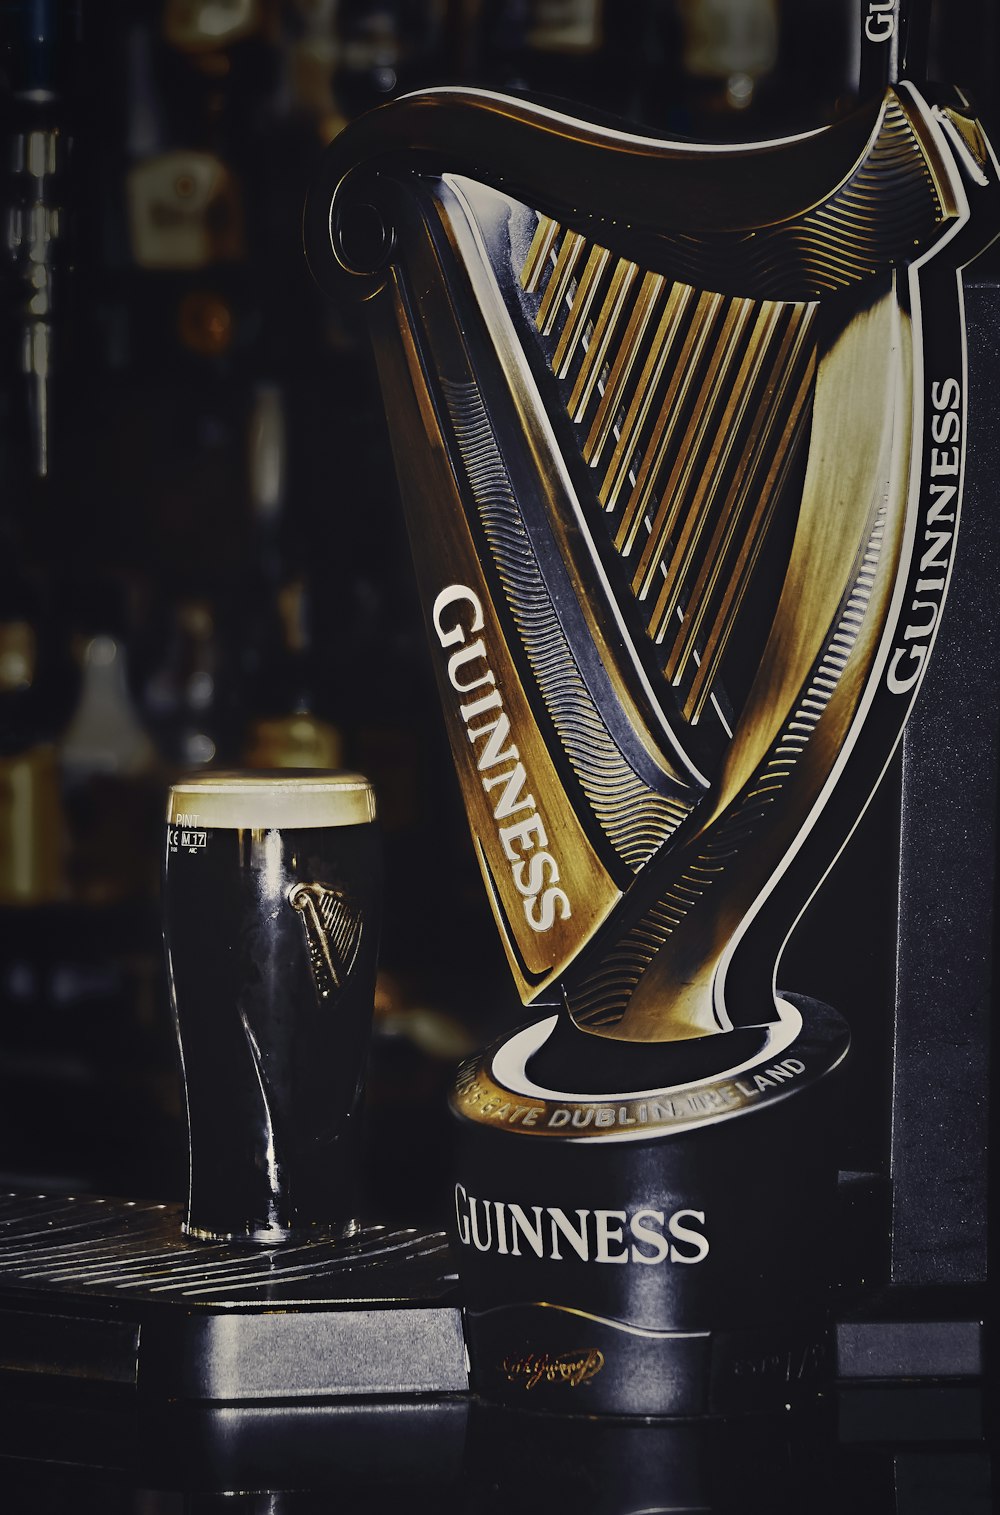 Guinness Pictures | Download Free Images on Unsplash